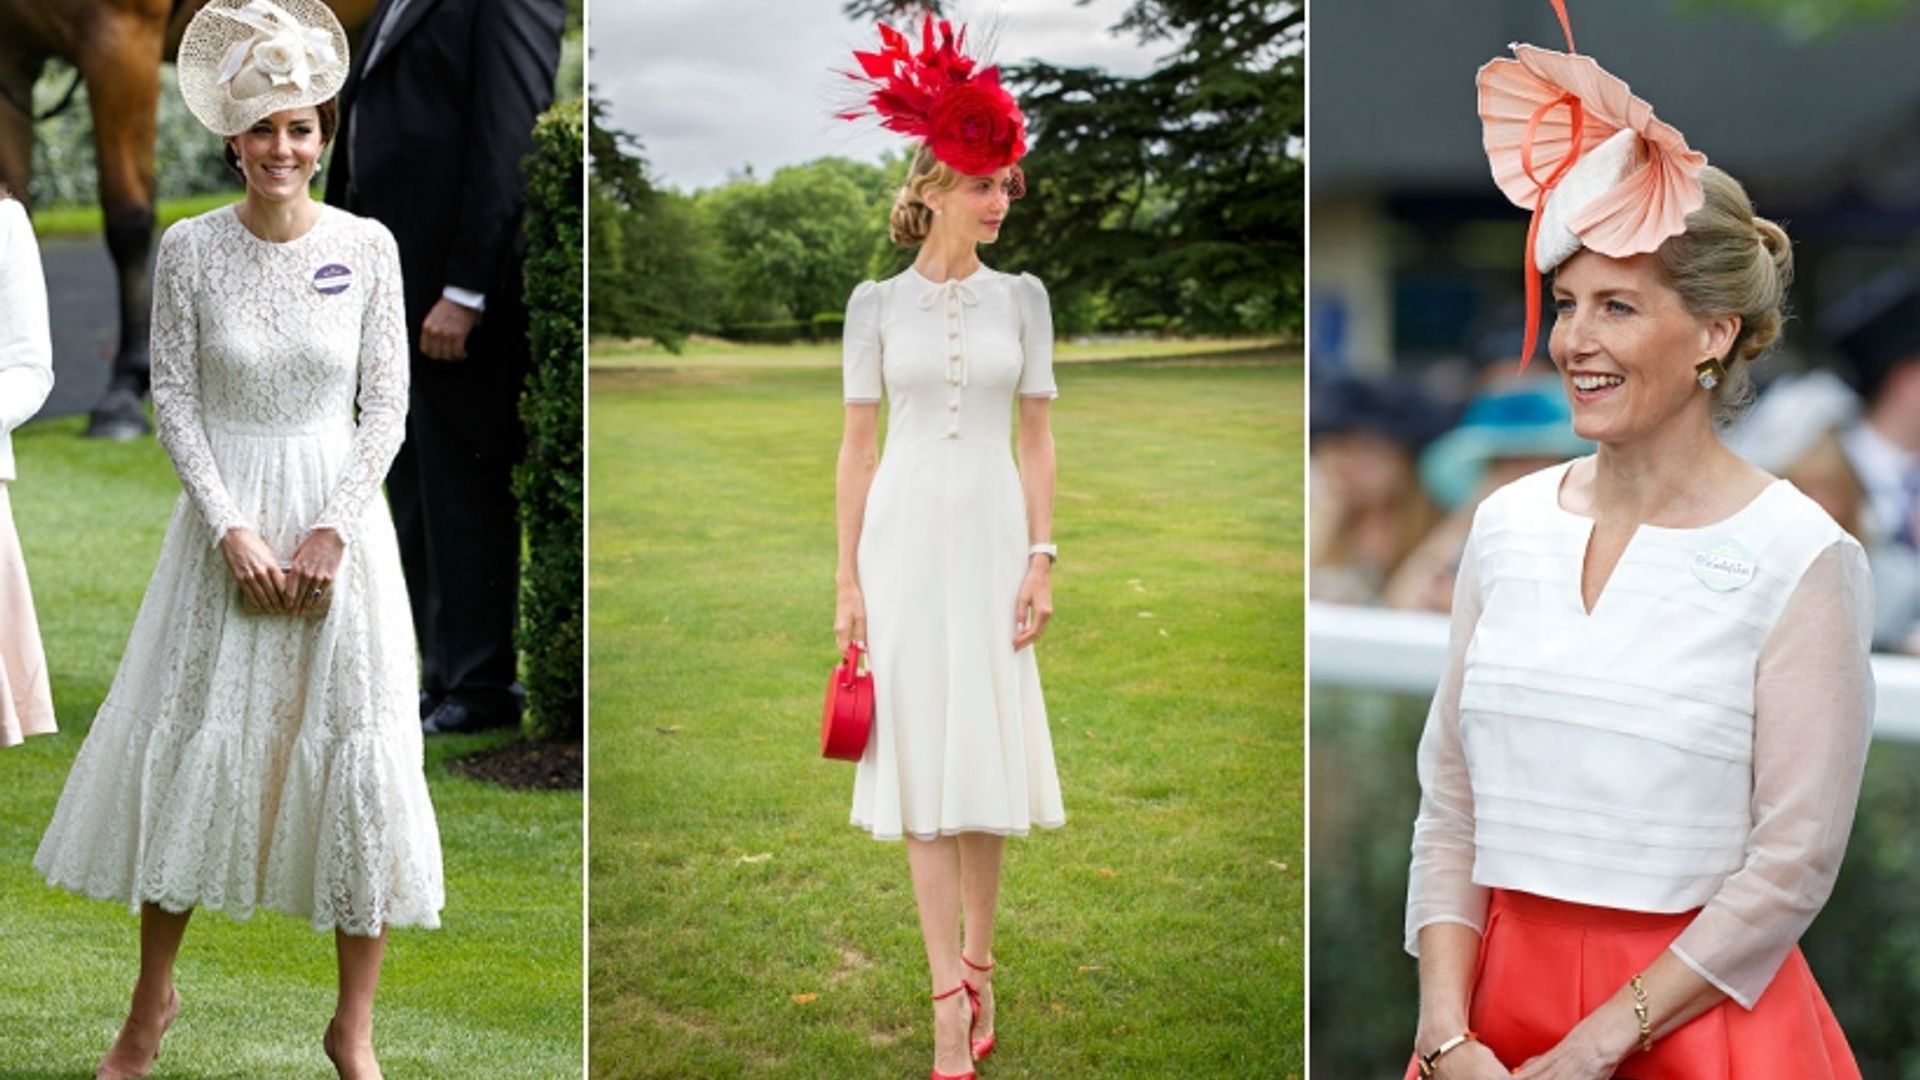 VIDEO: The dos and don’ts of dressing for Ascot